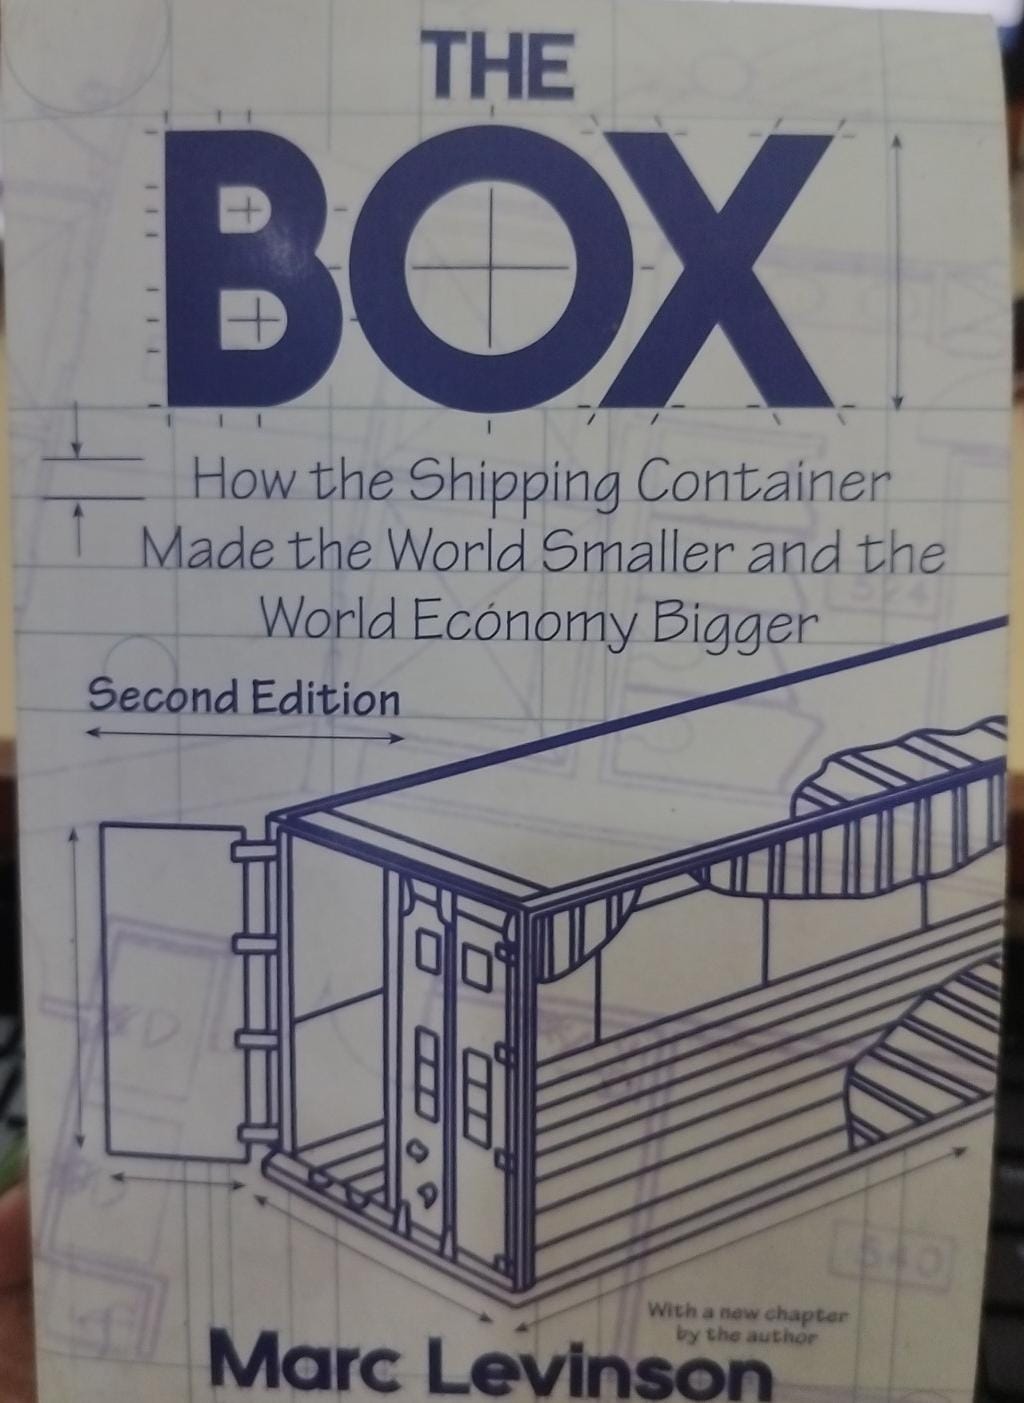 (Used) The Box: How the Shipping Container Made the World Smaller and the World Economy Bigger - Second Edition (Papercover)